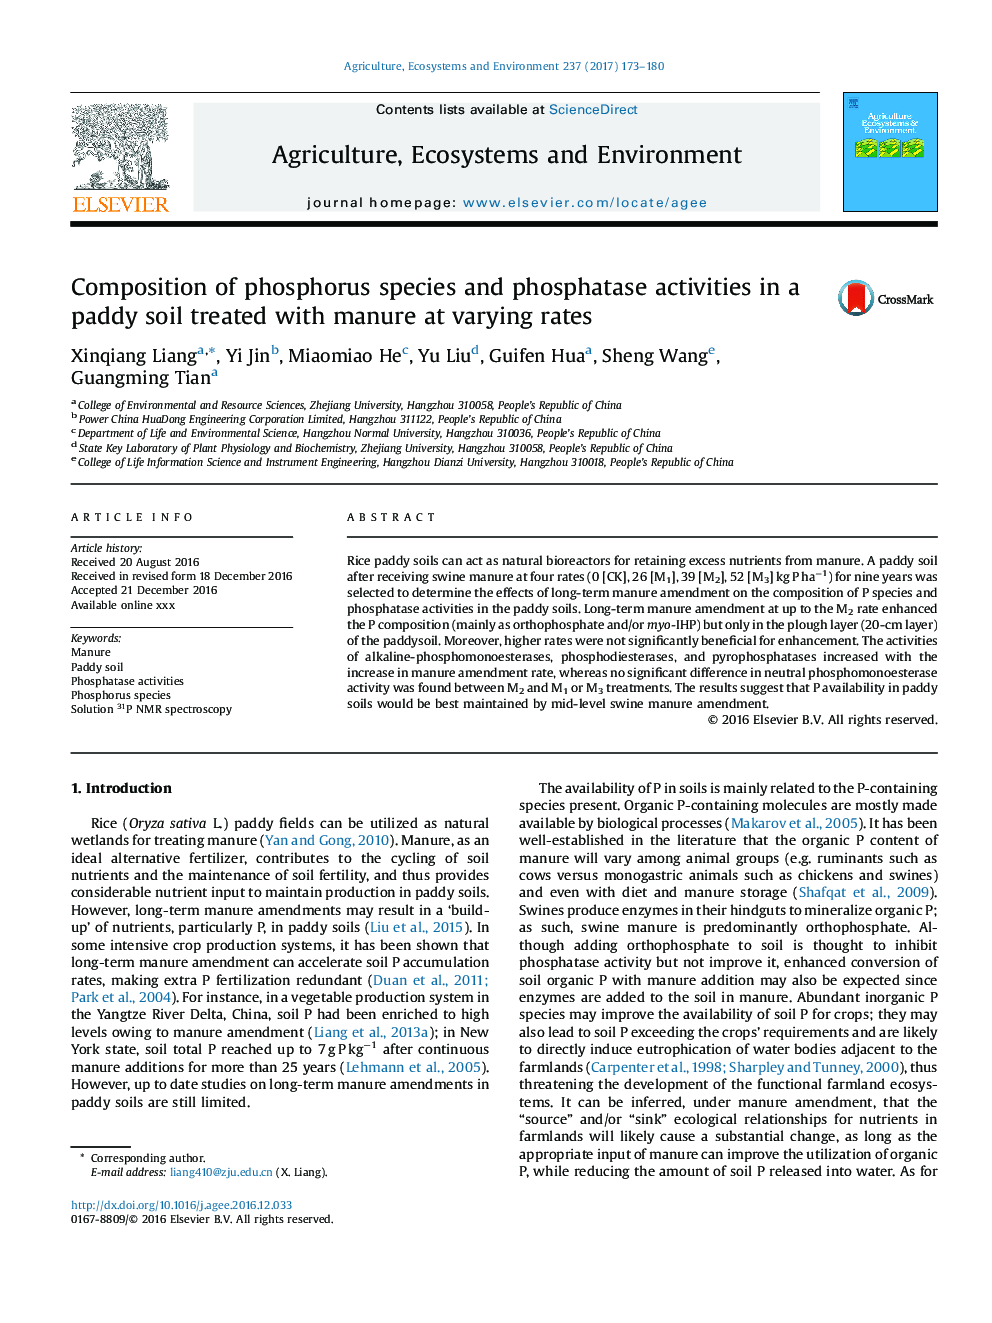 Composition of phosphorus species and phosphatase activities in a paddy soil treated with manure at varying rates